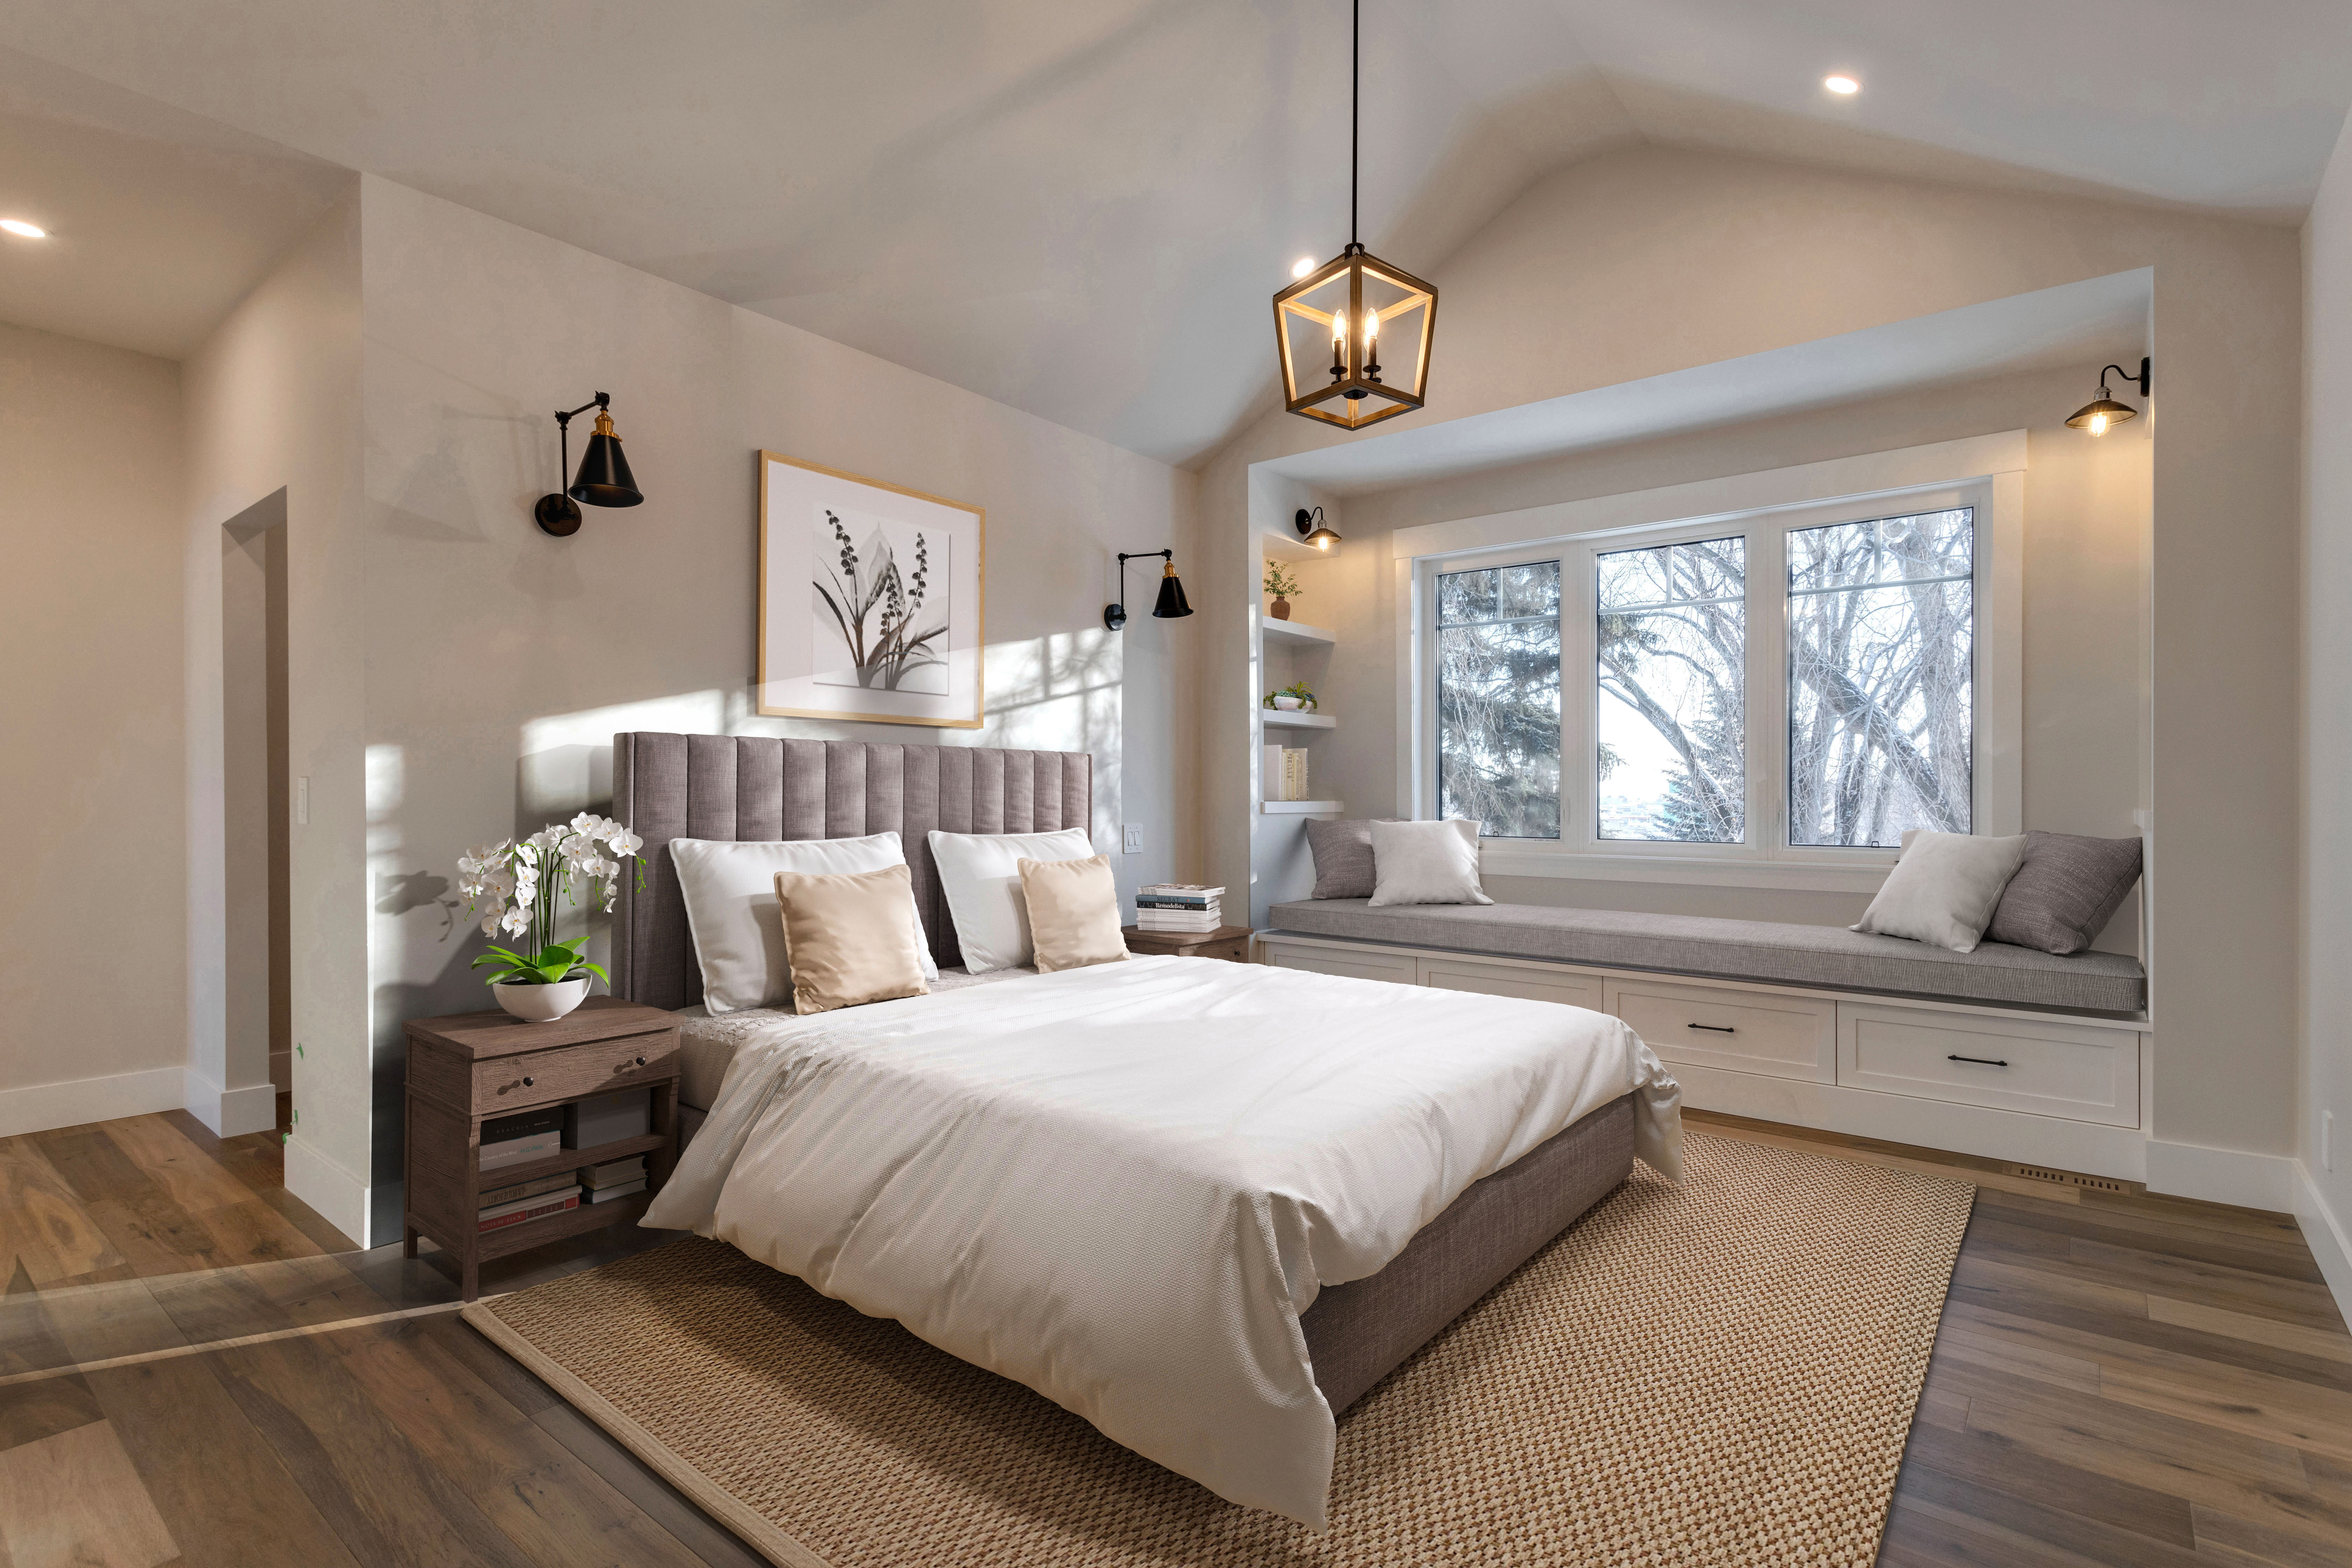 A primary bedroom with a recessed reading nook and large bed in the middle of the room.